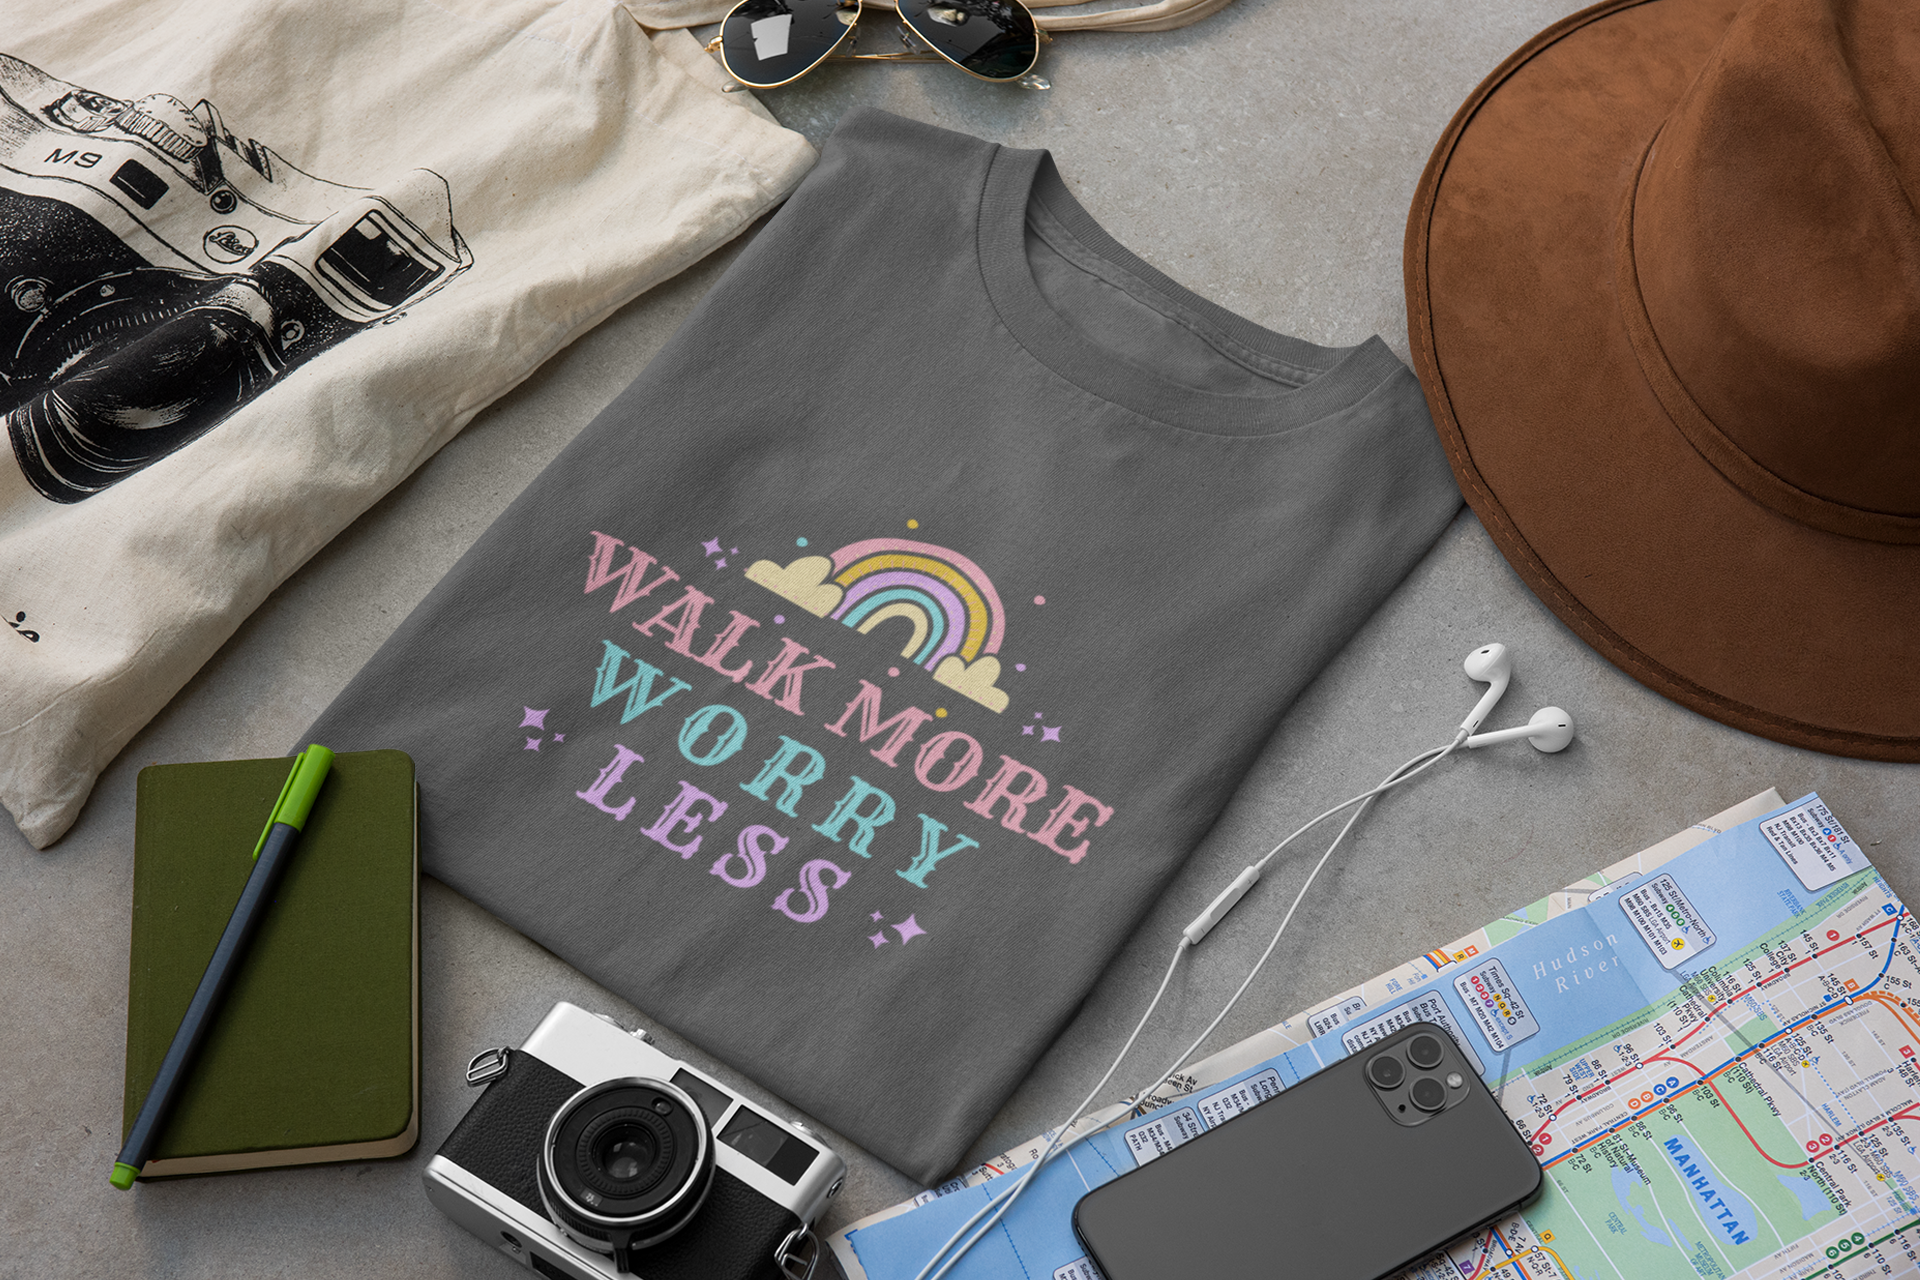 Tshirt for walkers